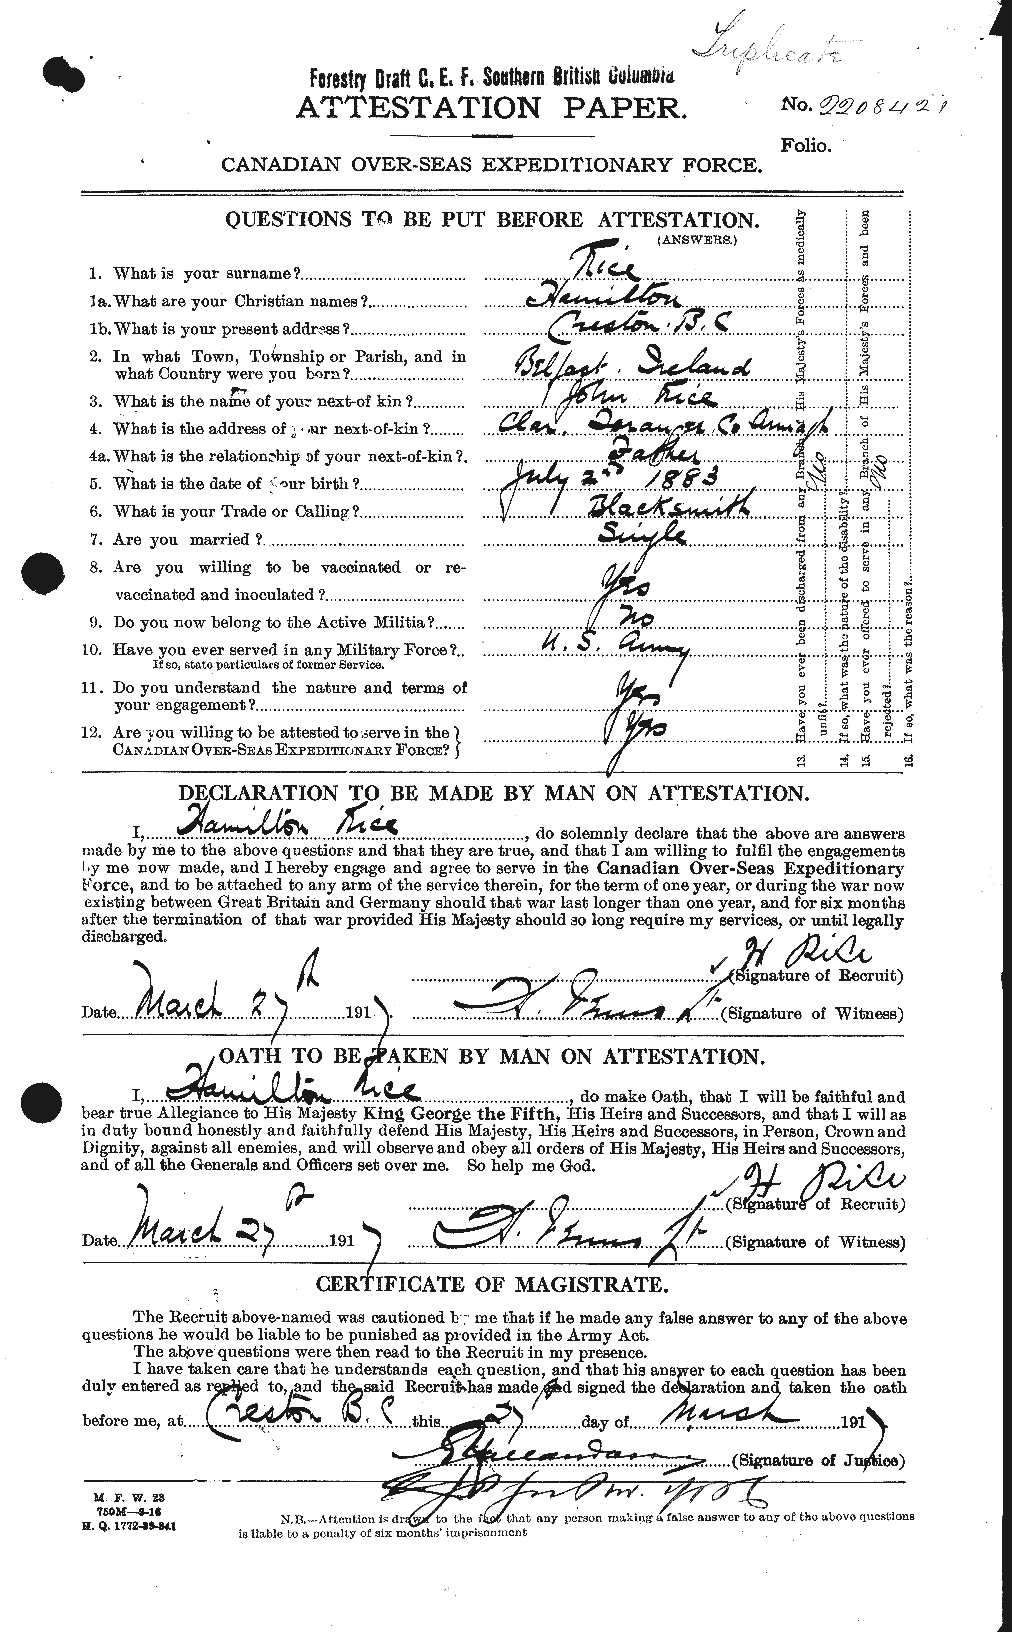 Personnel Records of the First World War - CEF 600353a